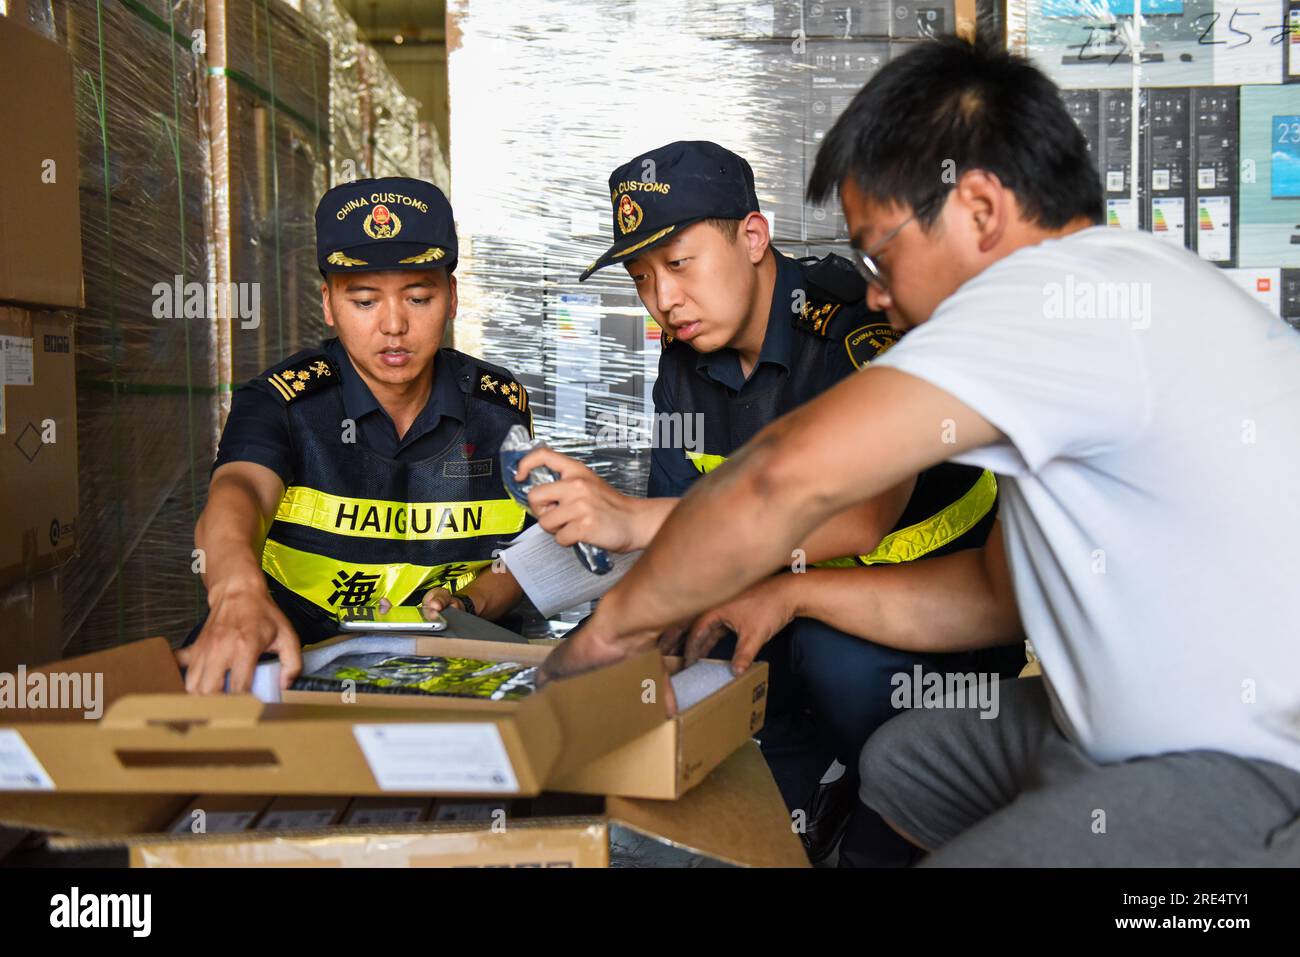 (230725) -- ALATAW PASS, July 25, 2023 (Xinhua) -- Custom staff check on cargo at the custom clearance center for the cross-border e-commerce of the Alataw Pass comprehensive bonded area in northwest China's Xinjiang Uygur Autonomous Region, July 24, 2023. In recent years, various measures have been taken to create a better business environment for cross-border e-commerce enterprises in Alataw Pass. The cross-border e-commerce business was launched in the inland port in northwest China's Xinjiang Uygur Autonomous Region in January 2020. In the first half of this year, more than 14.50 million c Stock Photo